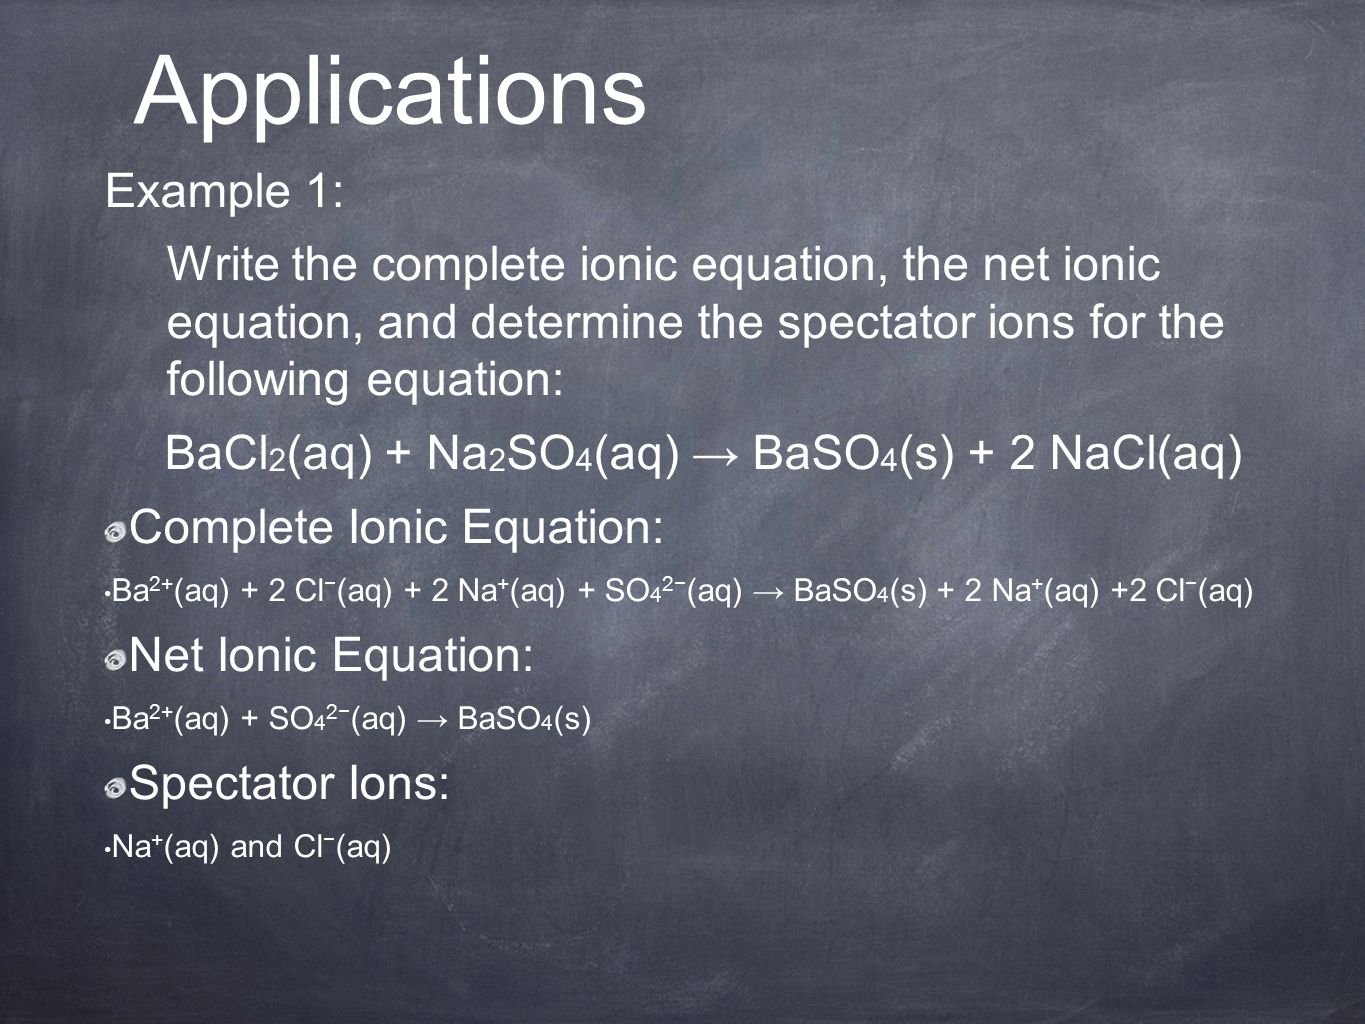 Example 1: Write the complete ionic equation, the net ionic equation, and determine the spectator ions for the following equation: BaCl 2 (aq) + Na 2 SO 4 (aq) → BaSO 4 (s) + 2 NaCl(aq) Complete Ionic Equation: Ba 2+ (aq) + 2 Cl − (aq) + 2 Na + (aq) + SO 4 2− (aq) → BaSO 4 (s) + 2 Na + (aq) +2 Cl − (aq) Net Ionic Equation: Ba 2+ (aq) + SO 4 2− (aq) → BaSO 4 (s) Spectator Ions: Na + (aq) and Cl − (aq) Applications